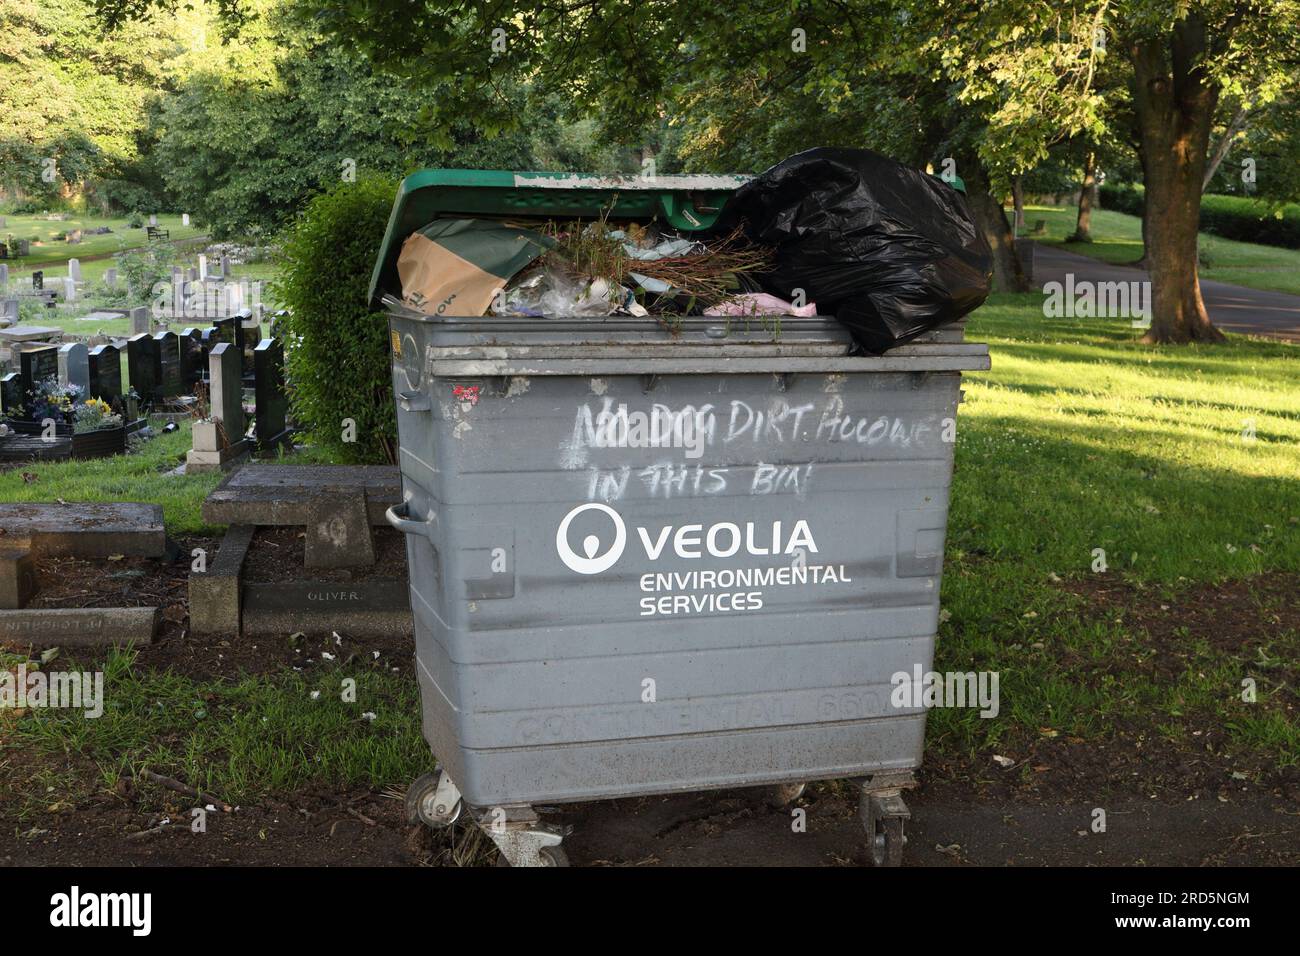 Veolia Large rubbish container bin in cemetery, No dog dirt allowed in this bin Stock Photo